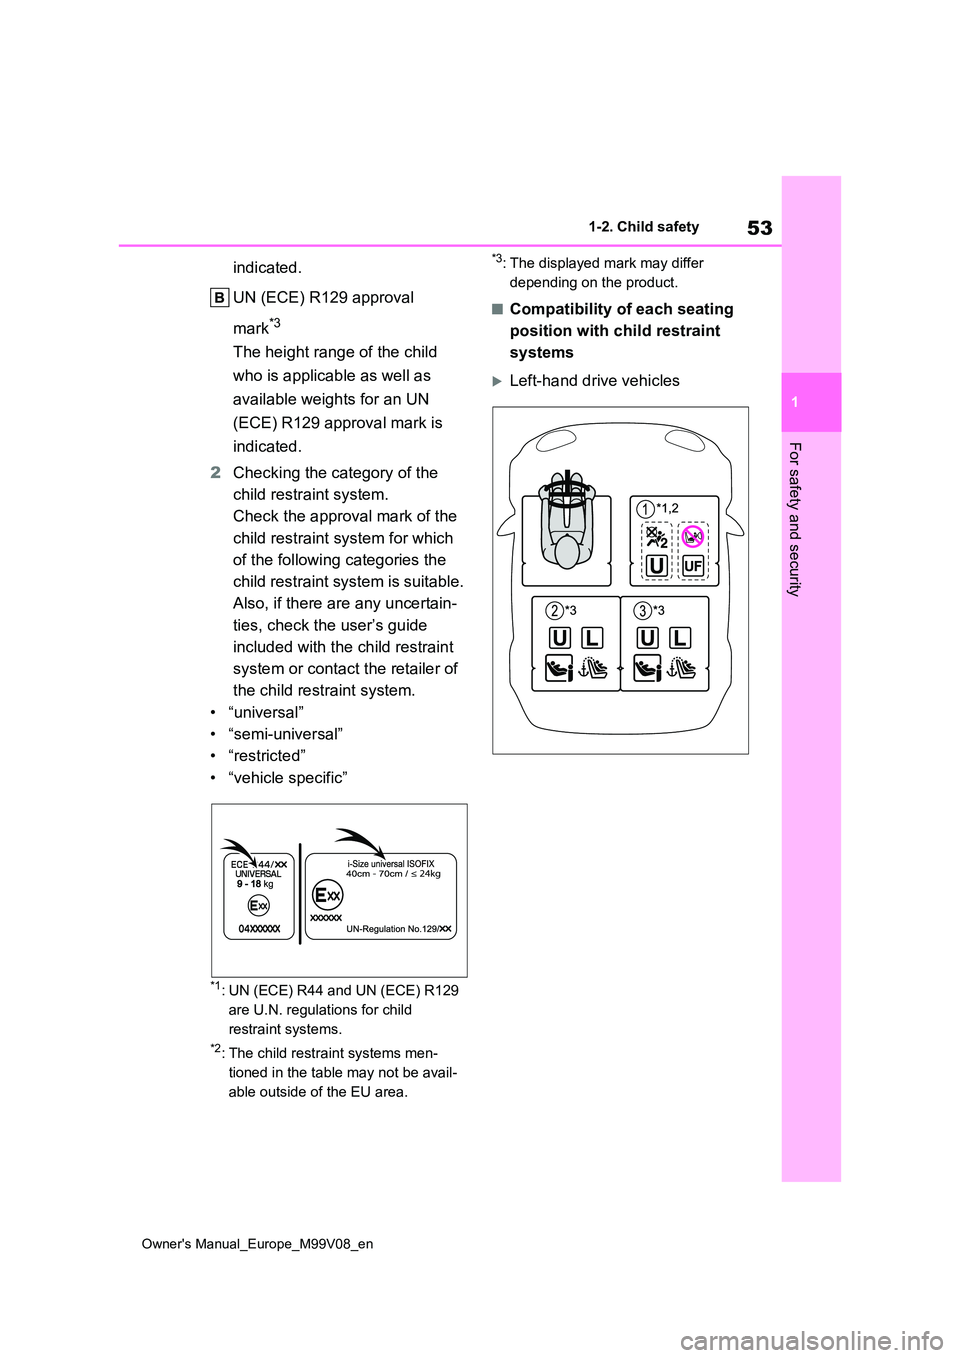 TOYOTA AYGO X 2022  Owners Manual (in English) 53
1
Owner's Manual_Europe_M99V08_en
1-2. Child safety
For safety and security
indicated. 
UN (ECE) R129 approval  
mark*3
The height range of the child  
who is applicable as well as 
available w